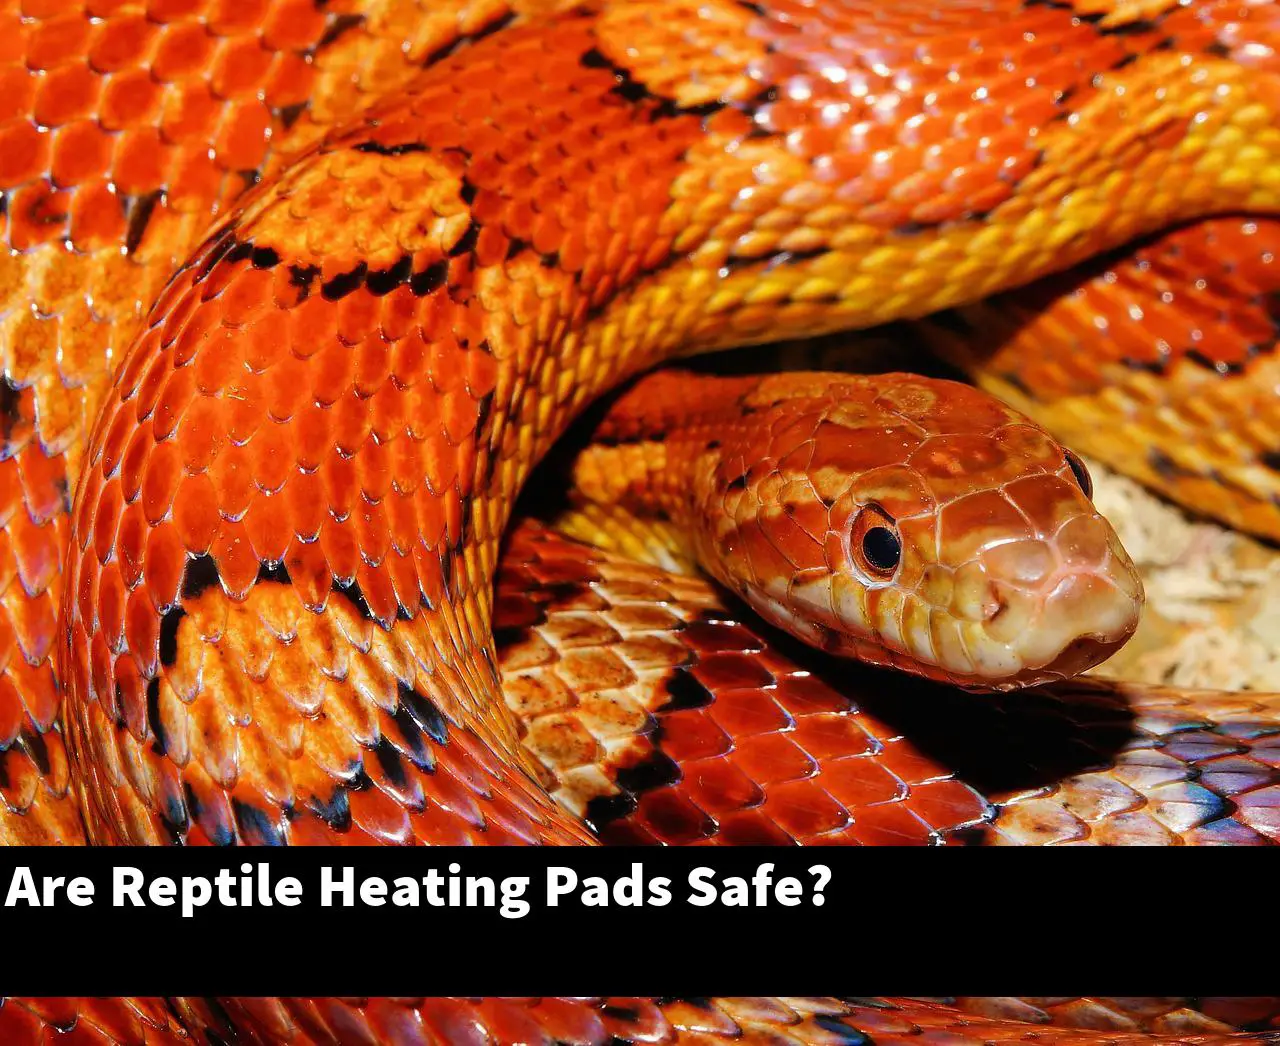 Are Reptile Heating Pads Safe?